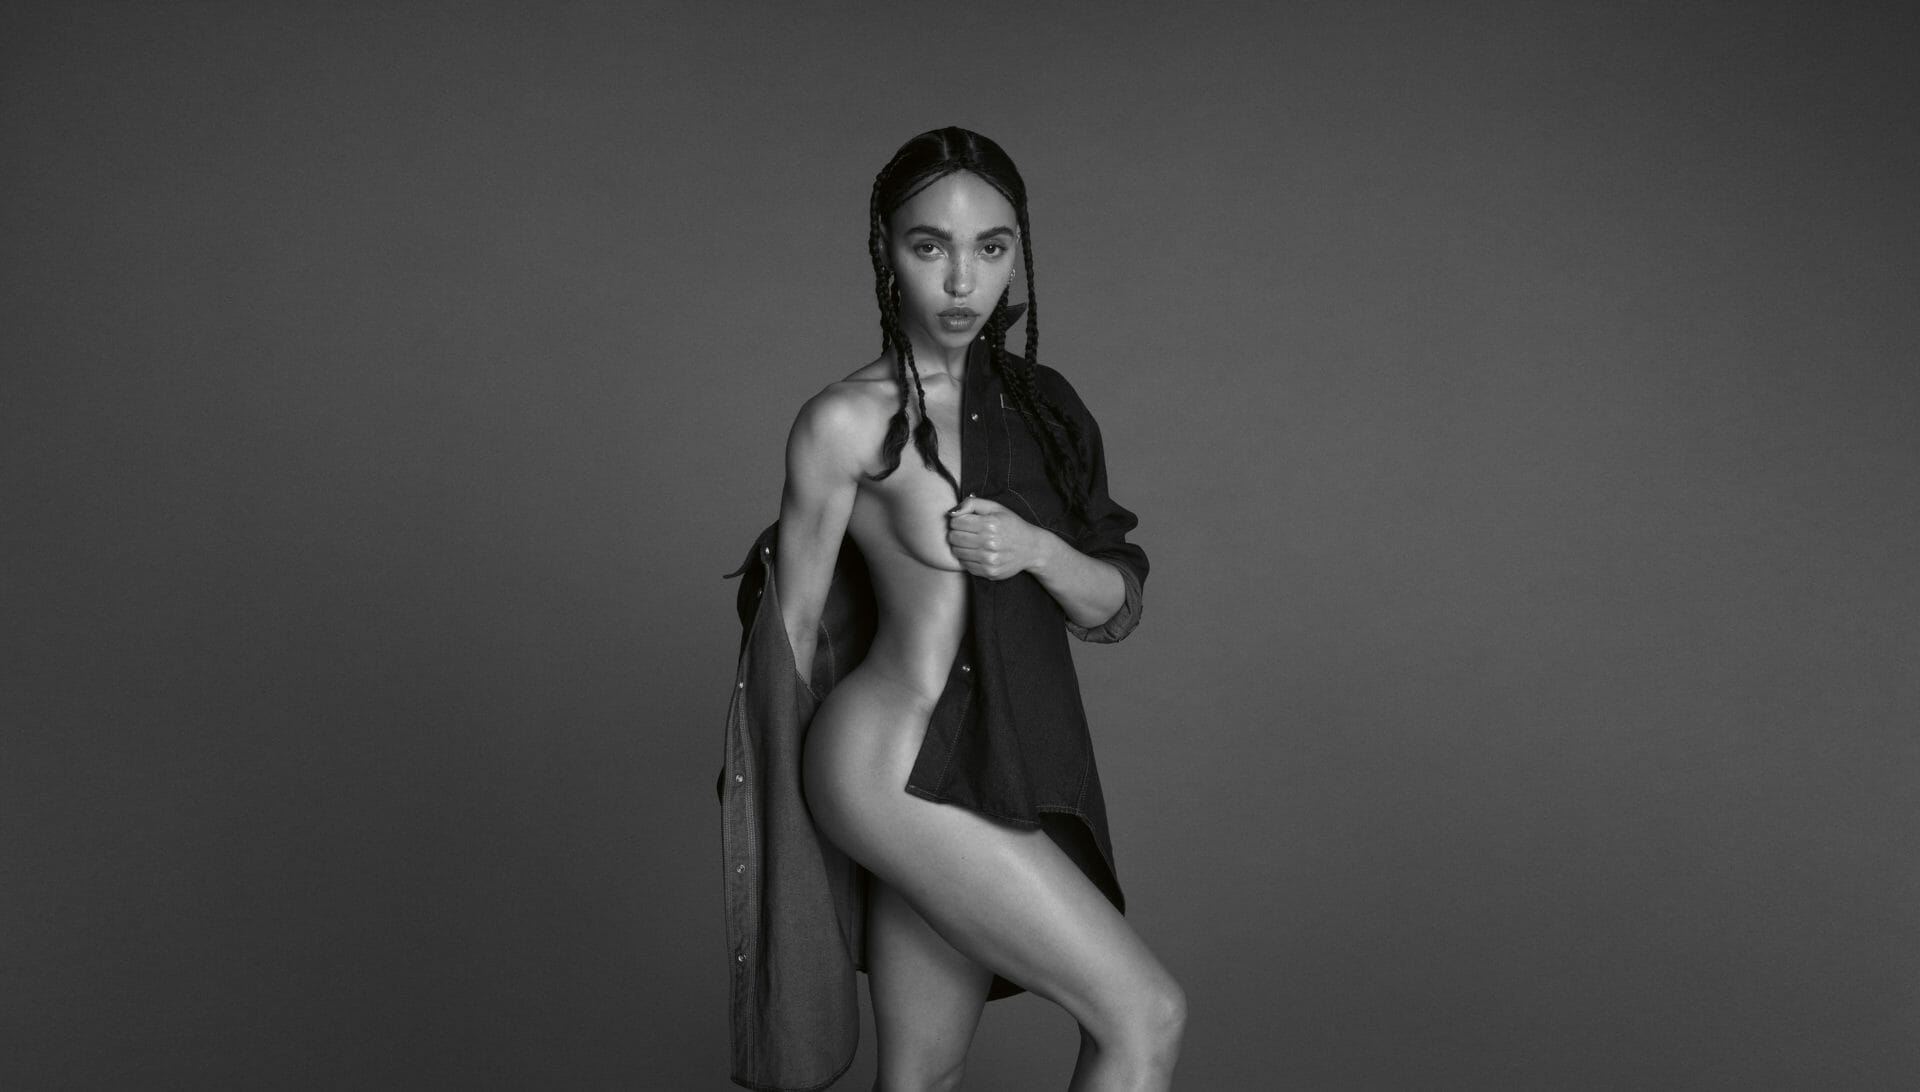 sp23 fka twigs 2 photo credit – mert and marcus